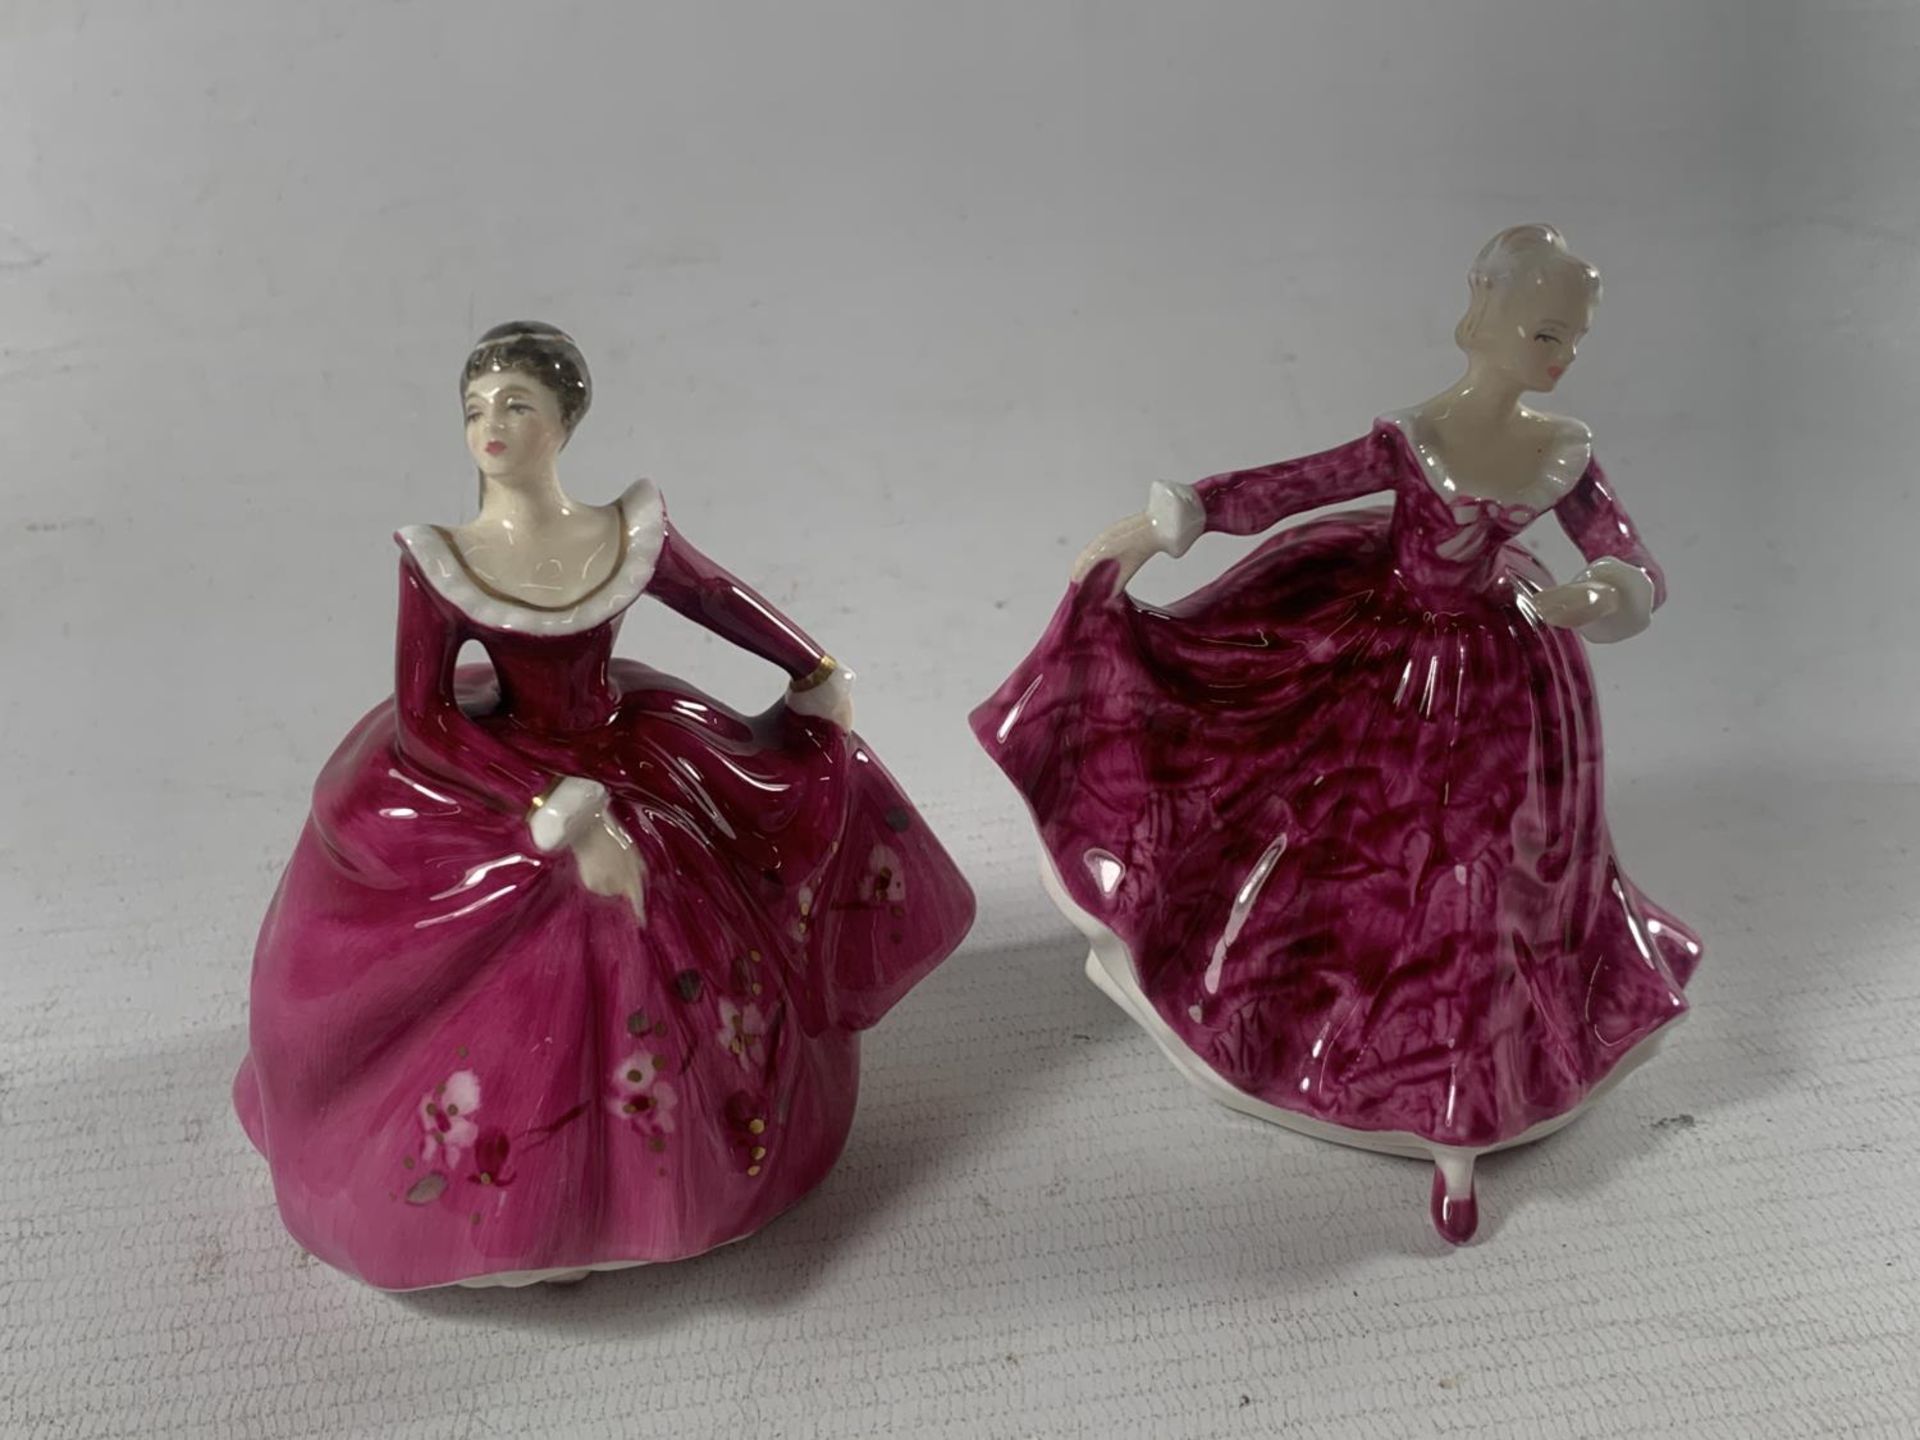 FOUR ROYAL DOULTON FIGURES TO INCLUDE KAREN, FRAGRANCE, KIRSTY, AND NINETTE - Image 2 of 5